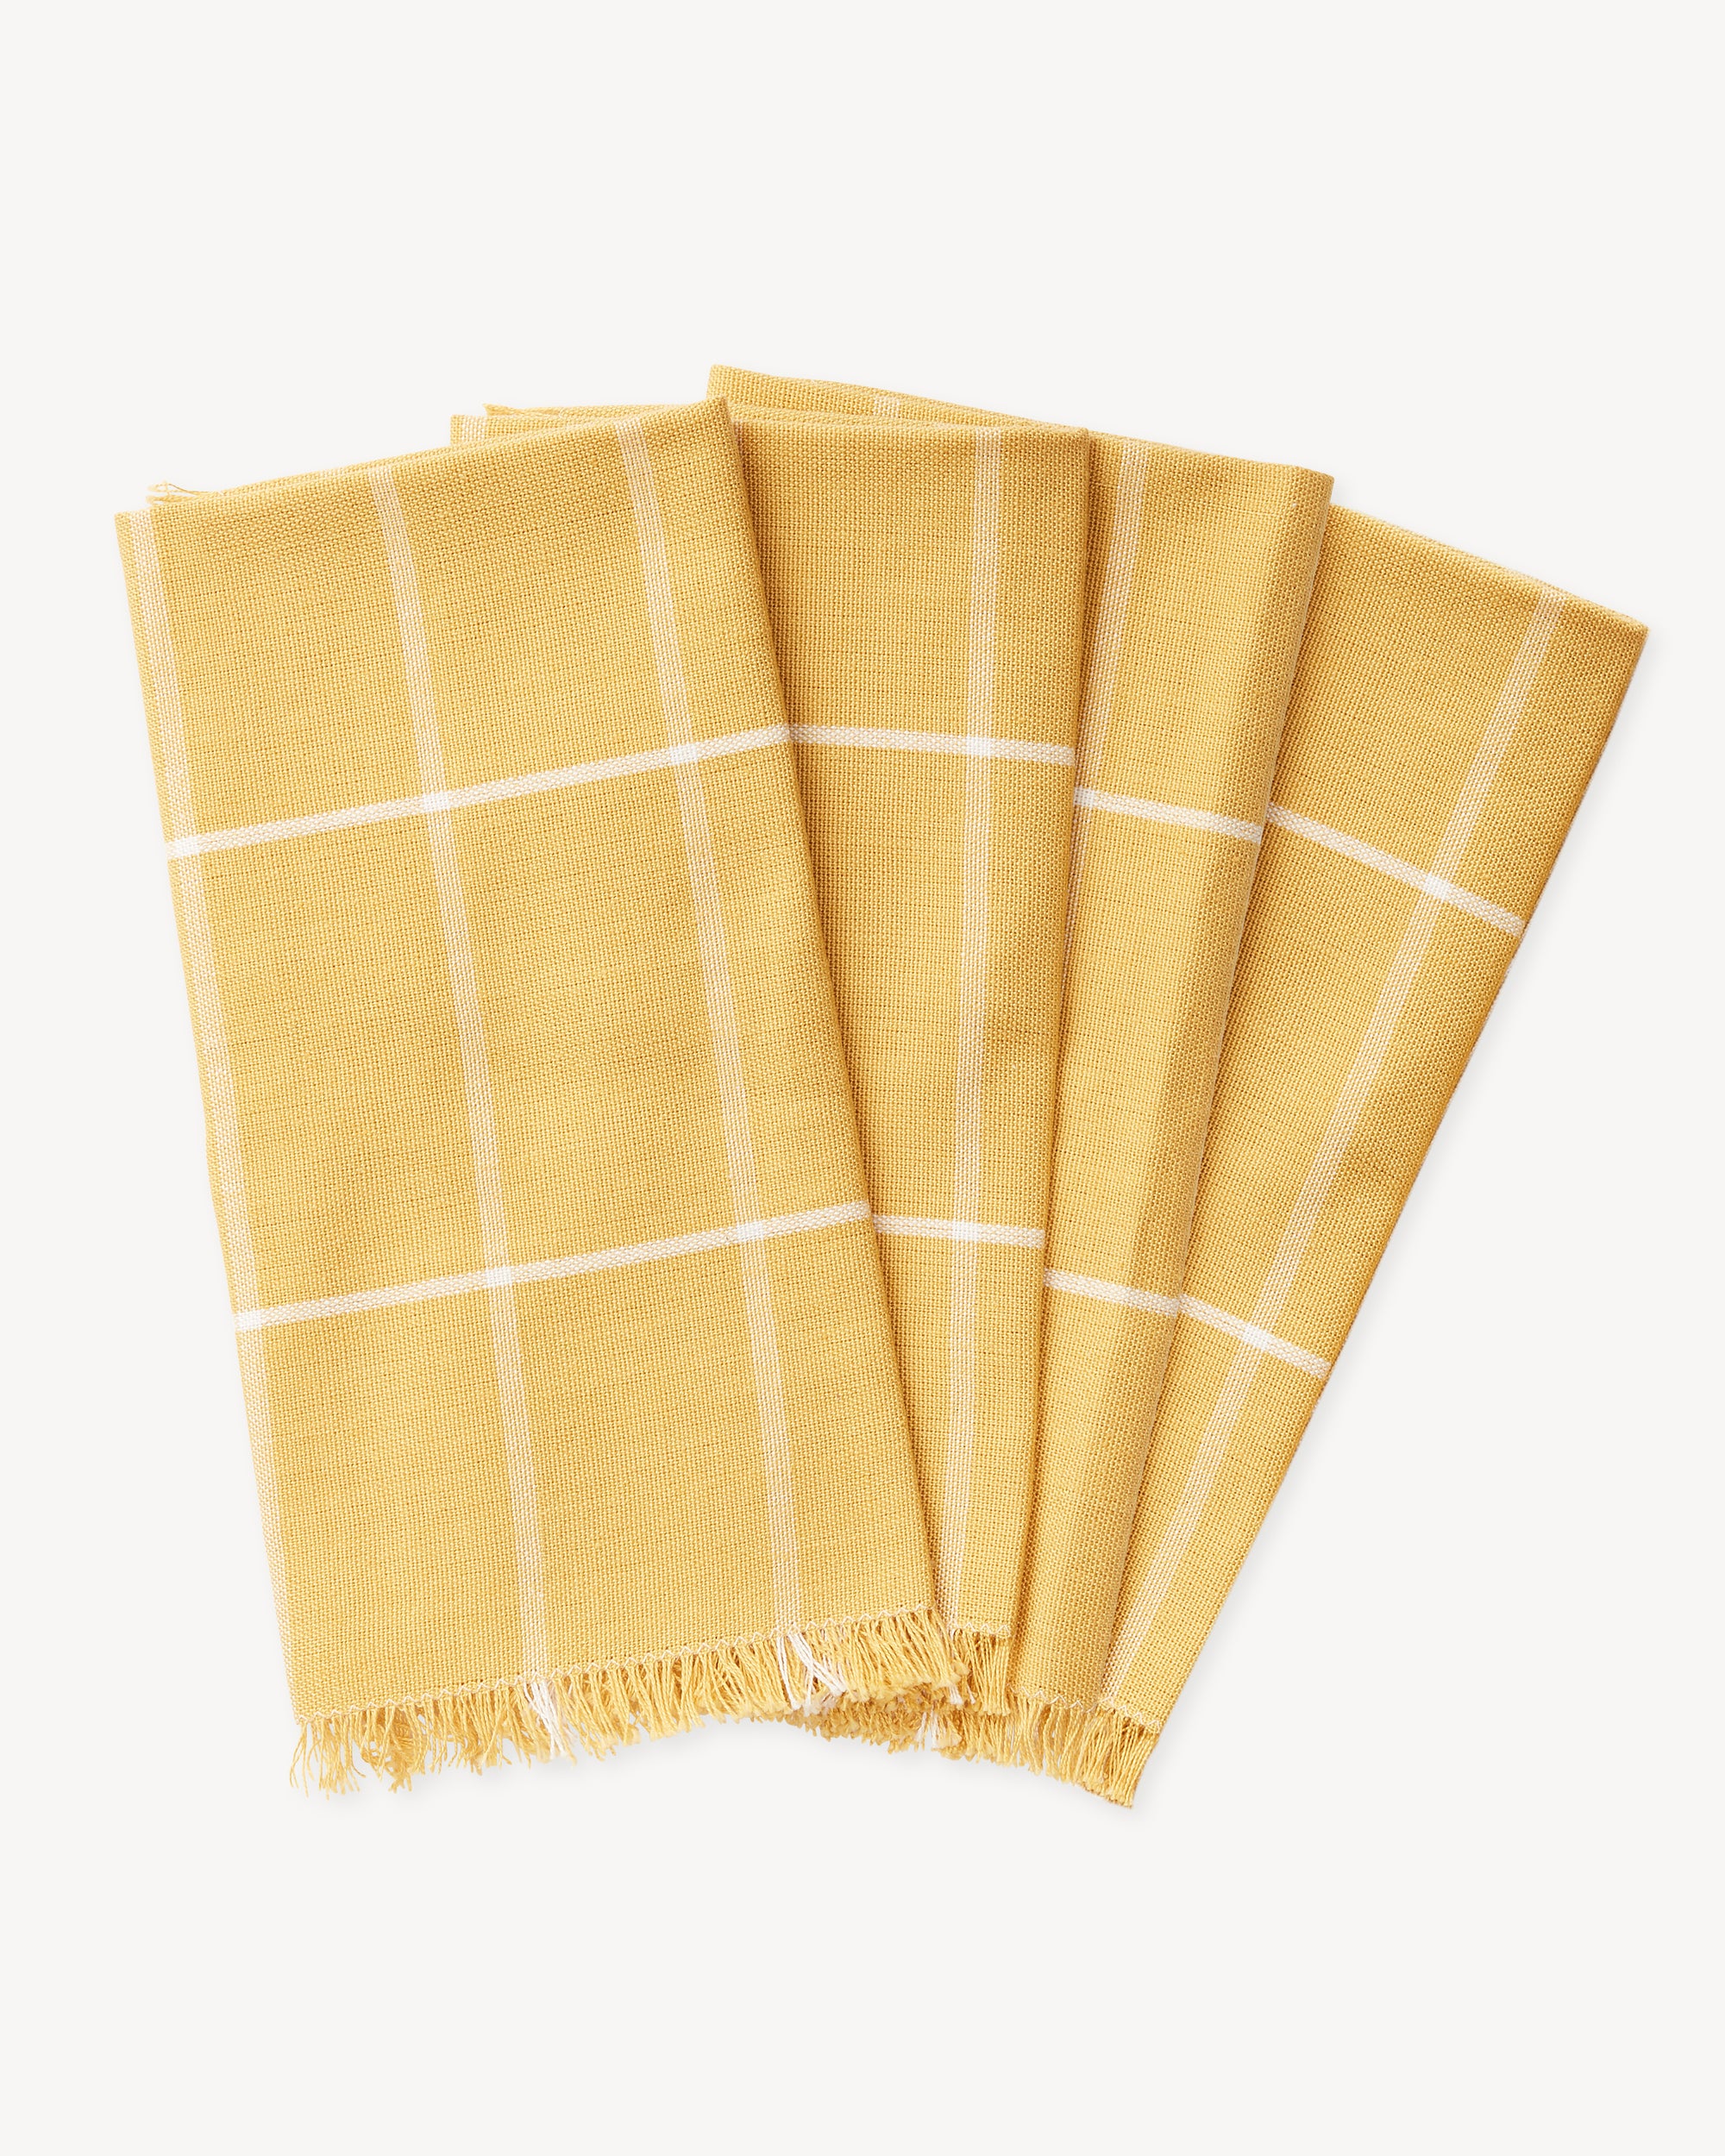 Ethically handwoven MINNA napkins with gold grid pattern, yellow